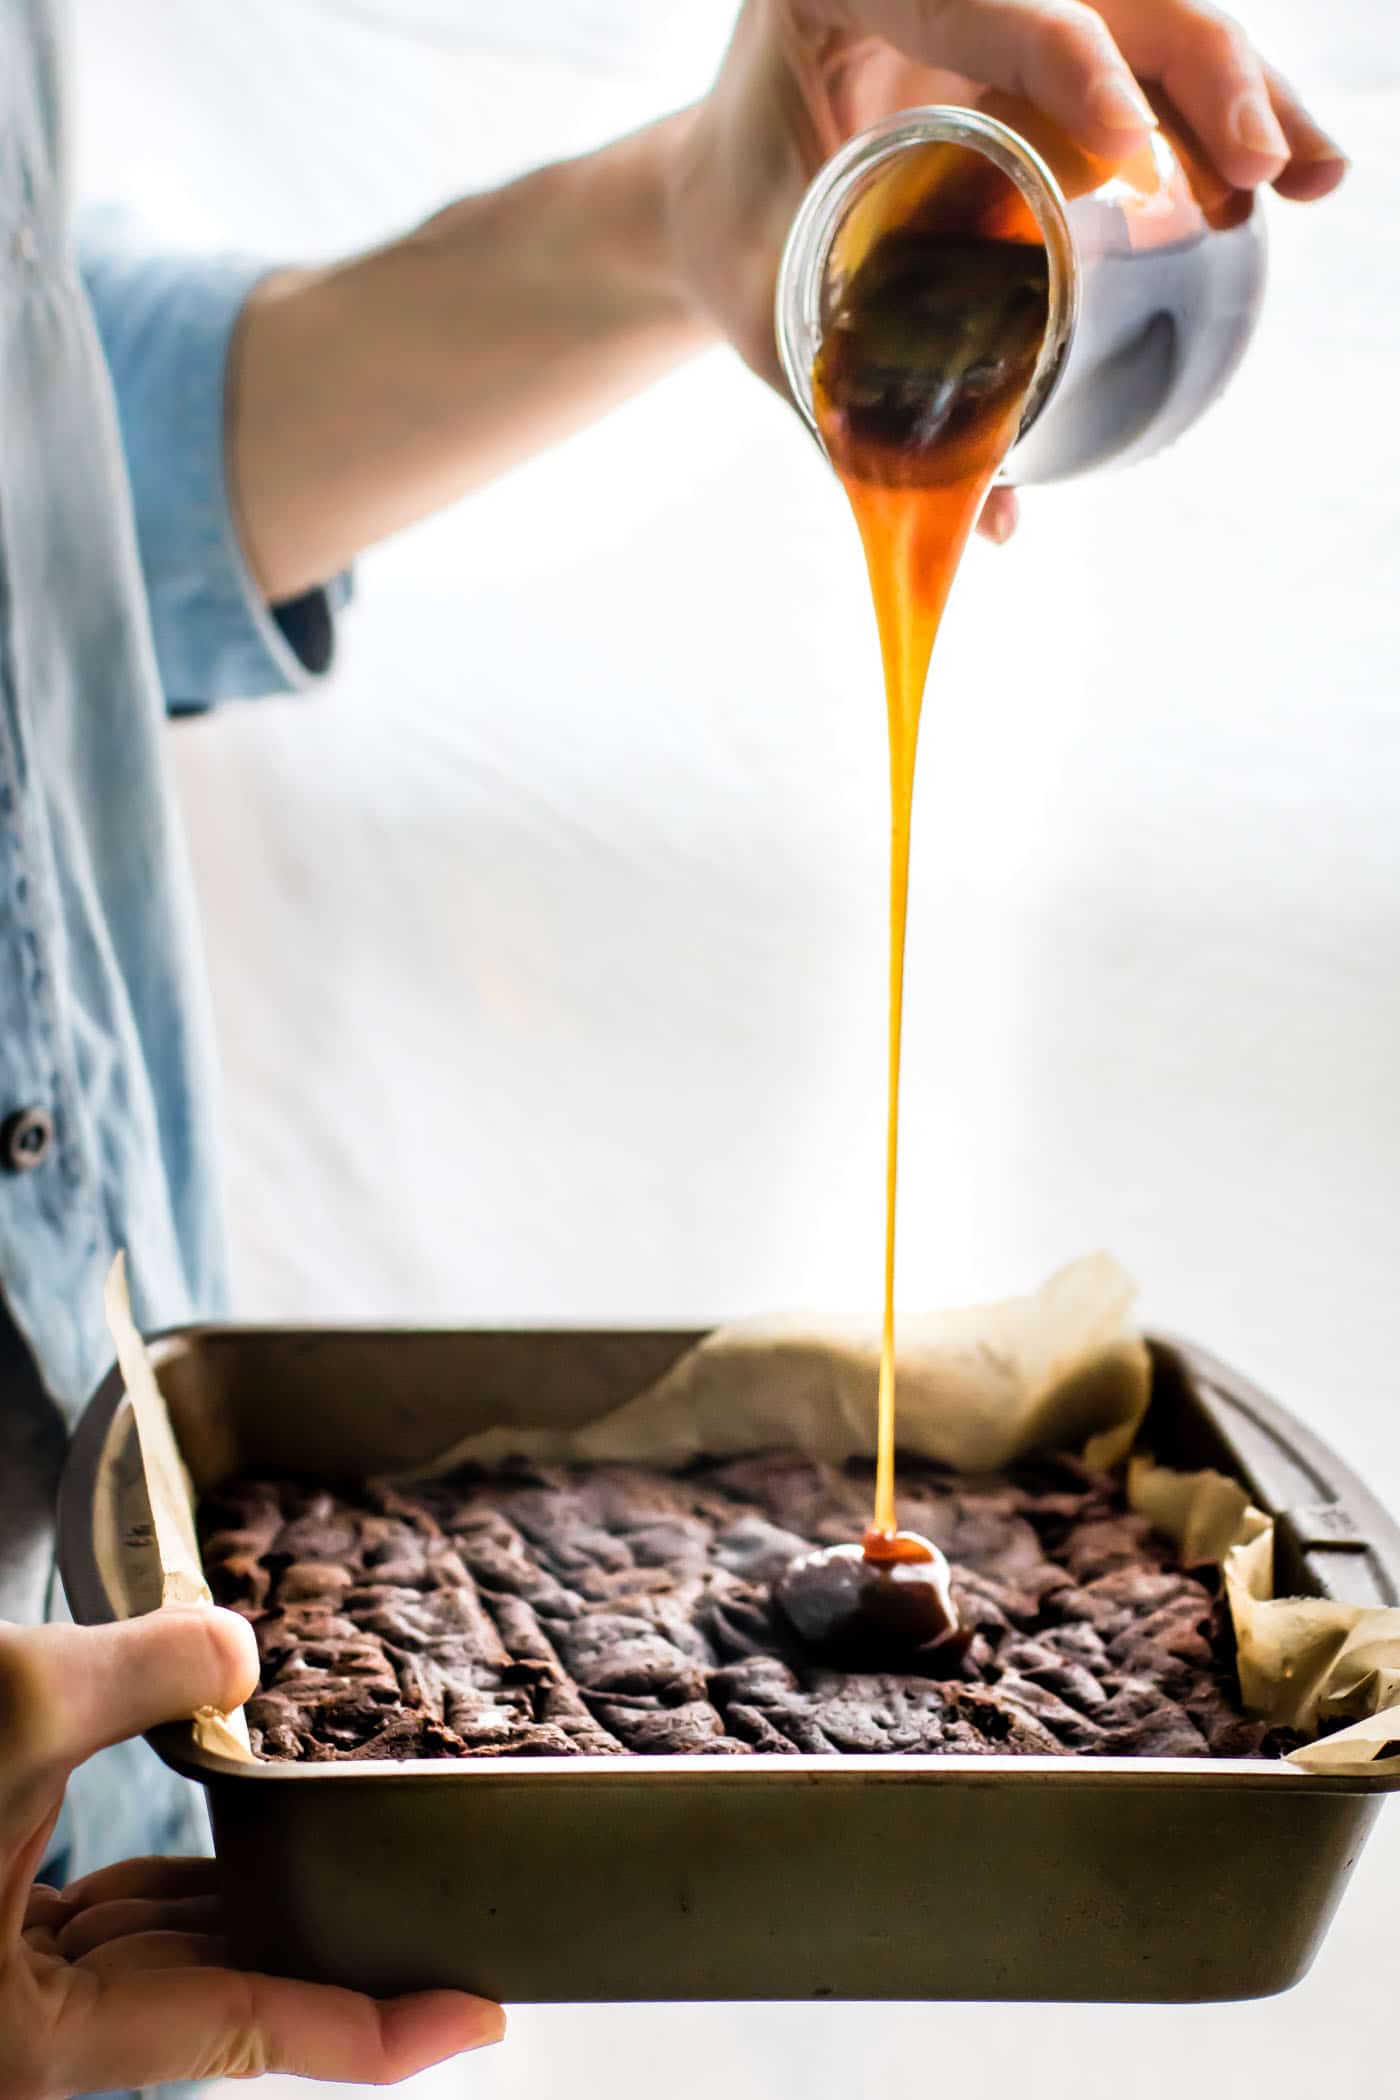 Caramel sauce being drizzled from a glass jar onto a pan of dark chocolate gluten-free brownies.